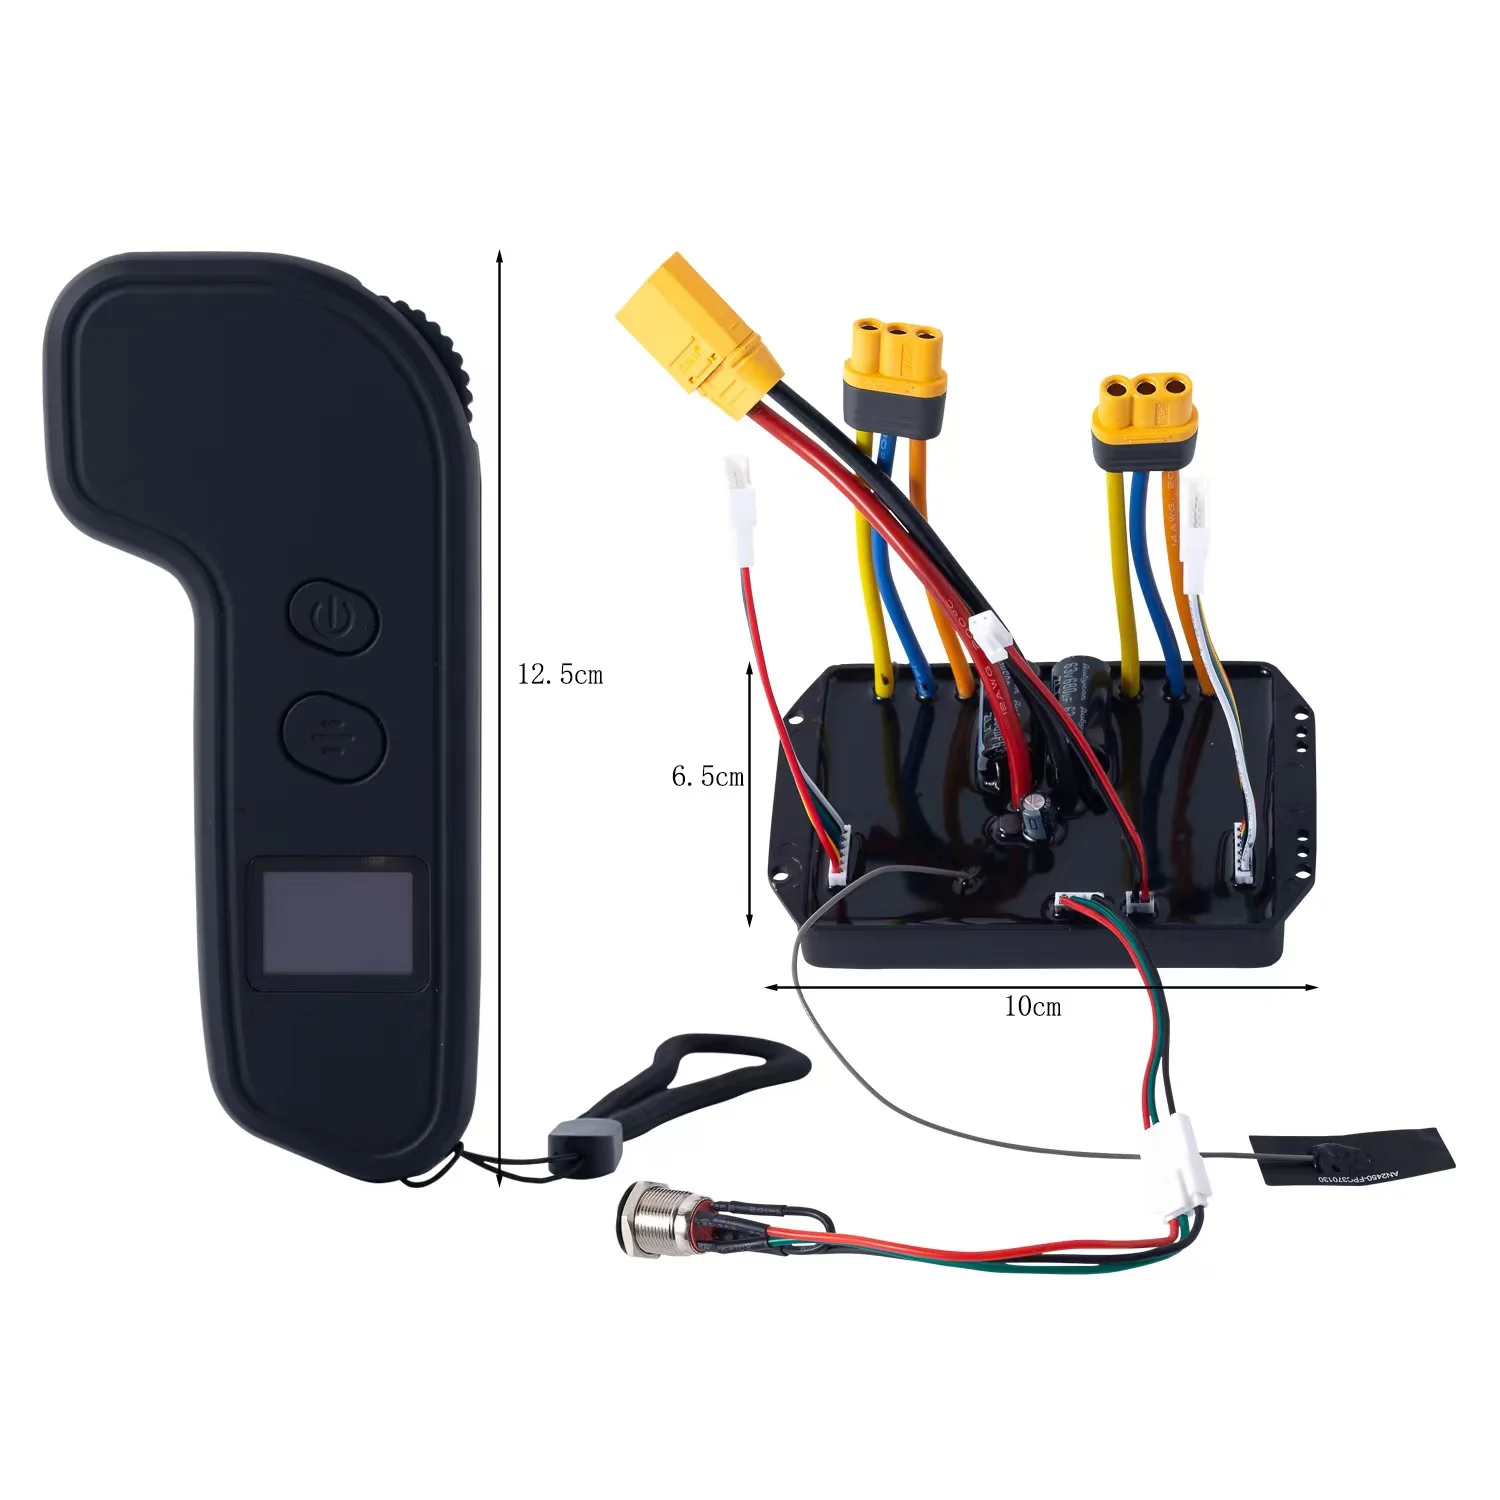 

60A FOC ESC(Electronics Speed Controller) & Remote Controller Combo for Electric Skateboards W/ Self Learning Motor Specs